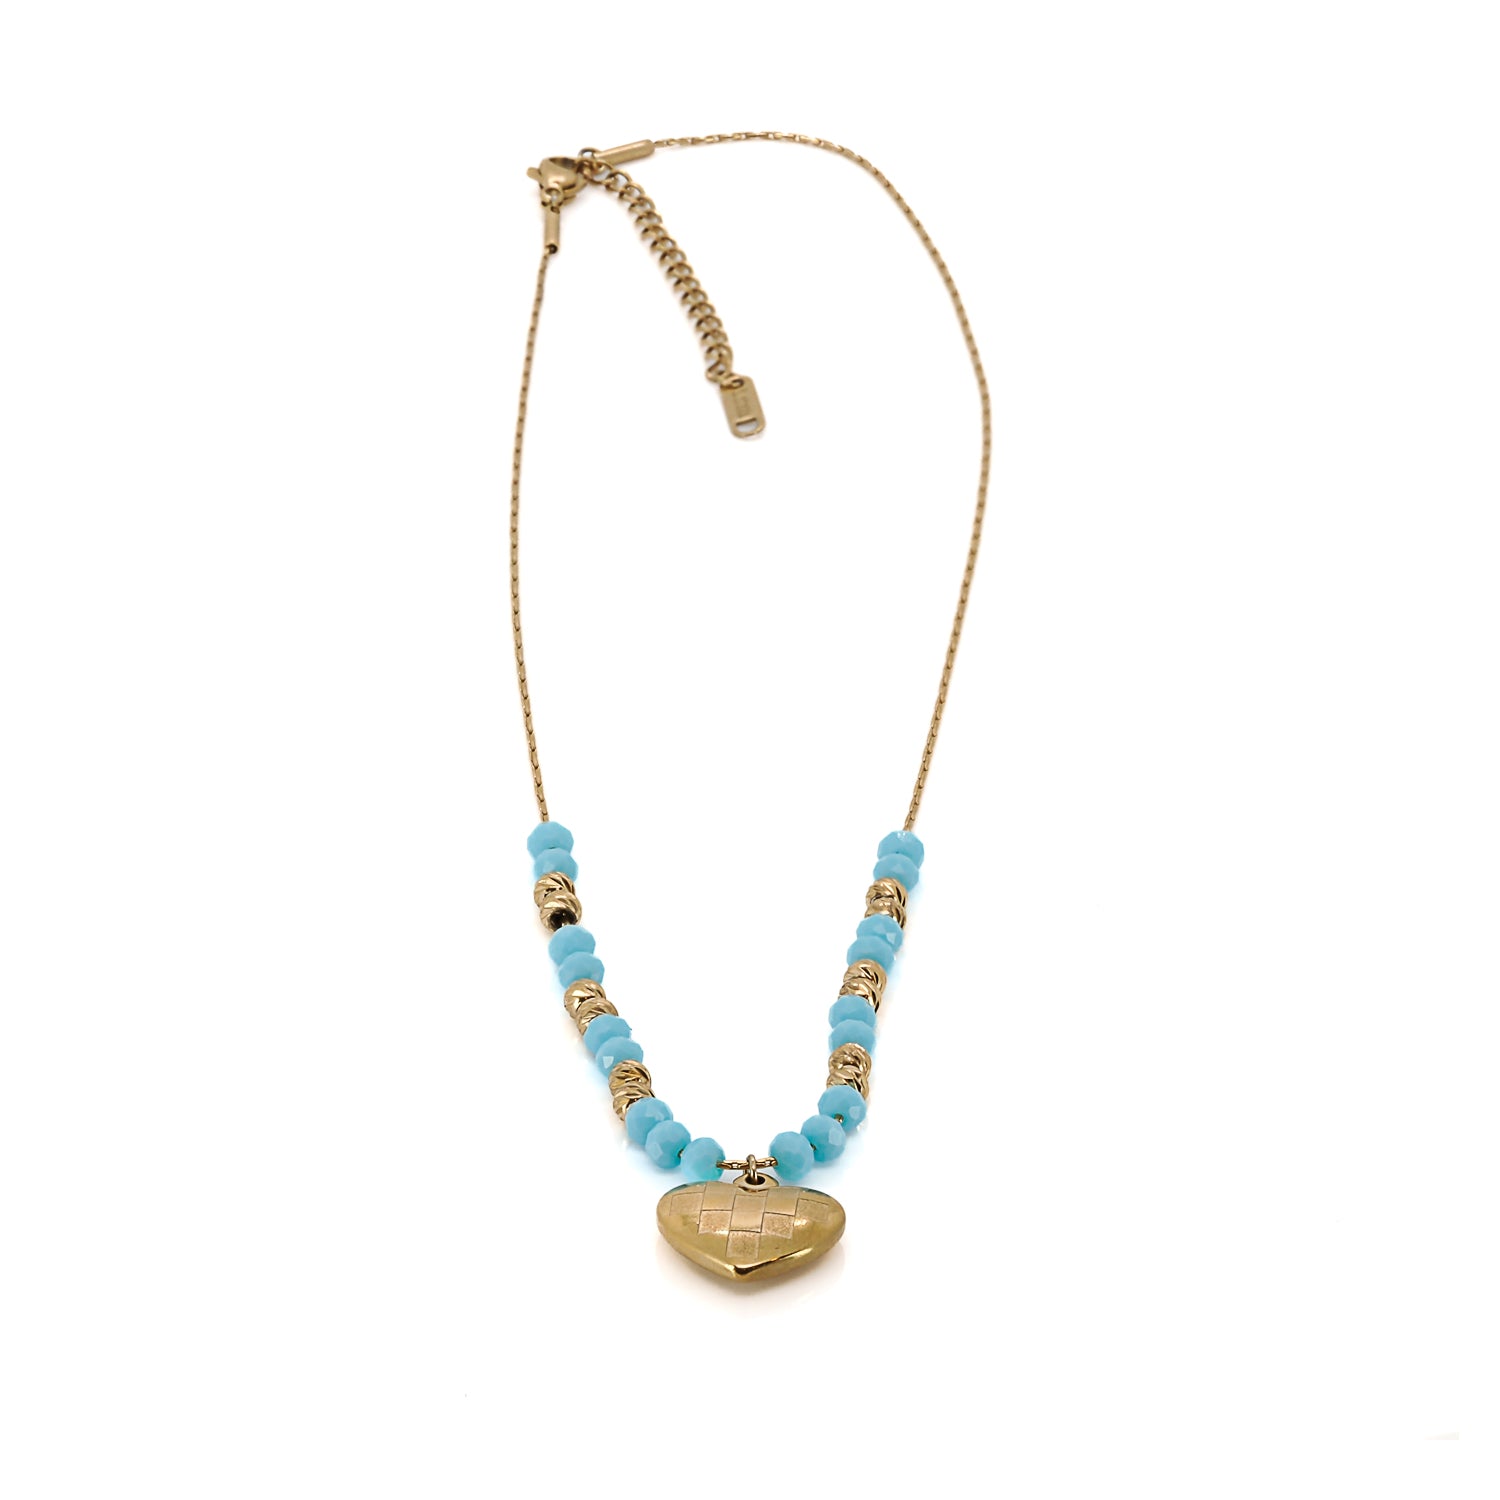 Harmonious Blend - Stainless Steel, Gold, and Blue Crystal Necklace.